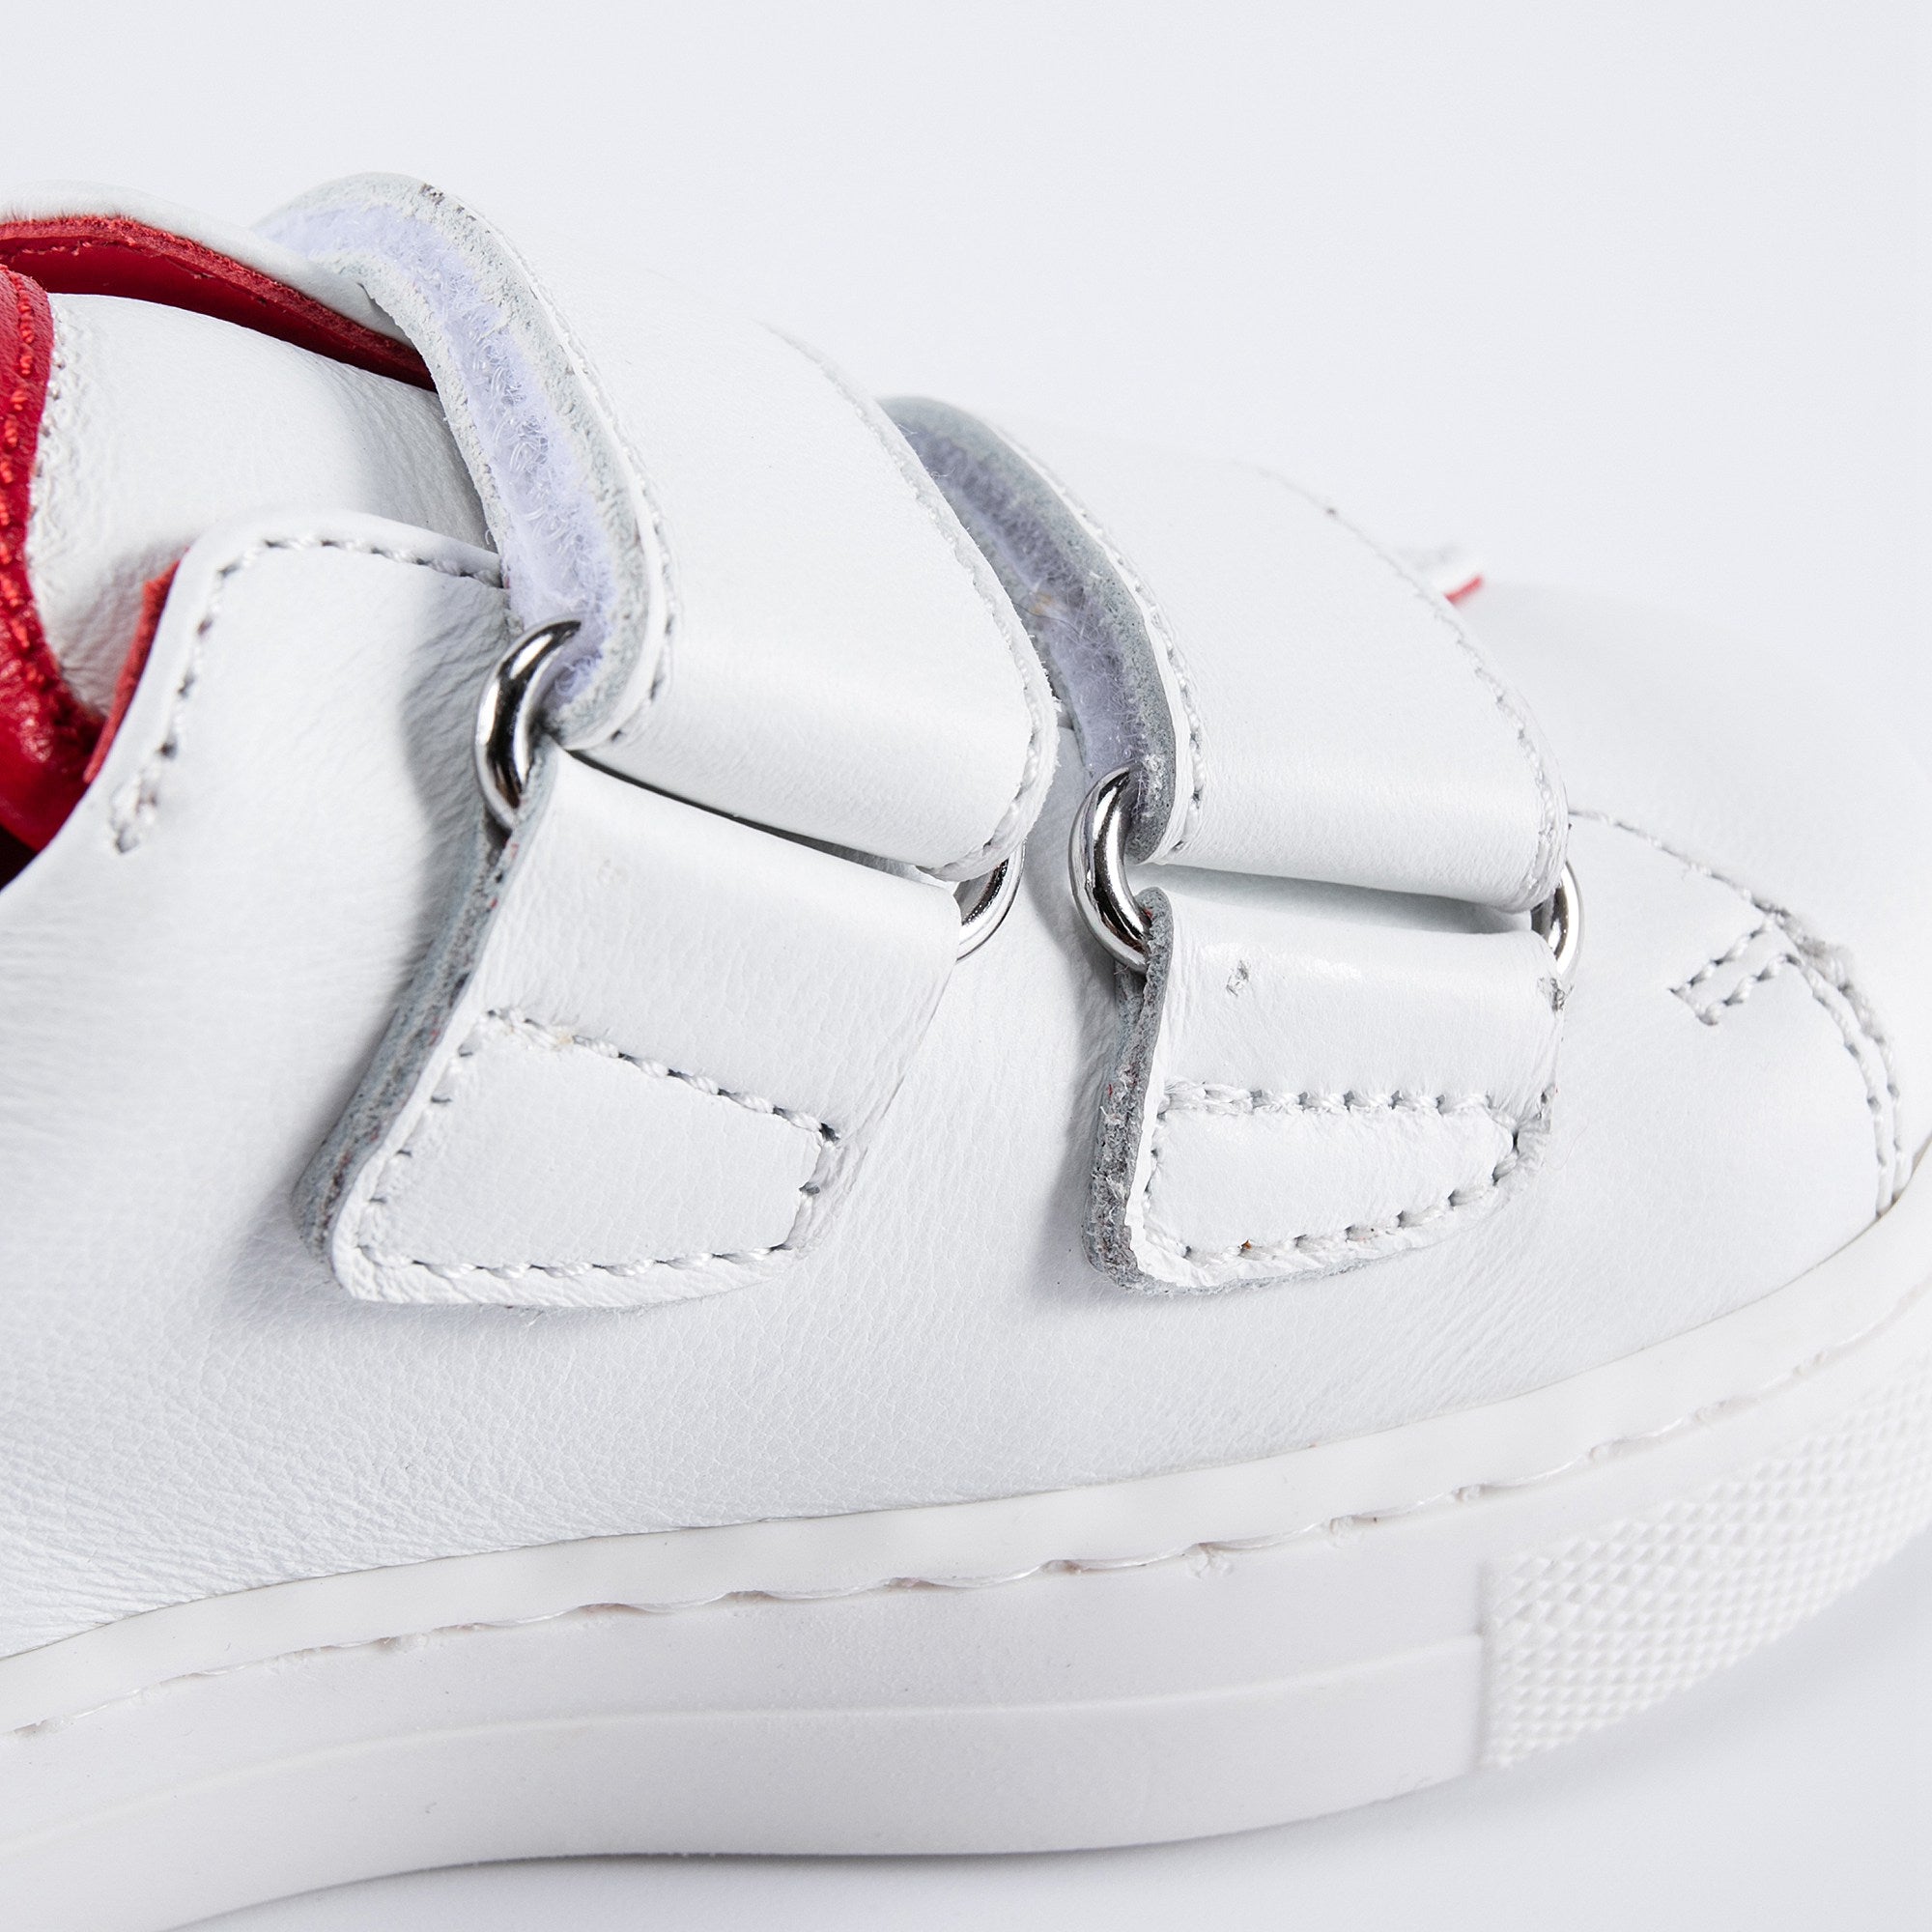 Boys & Girls Red Patch Teddy Sneakers